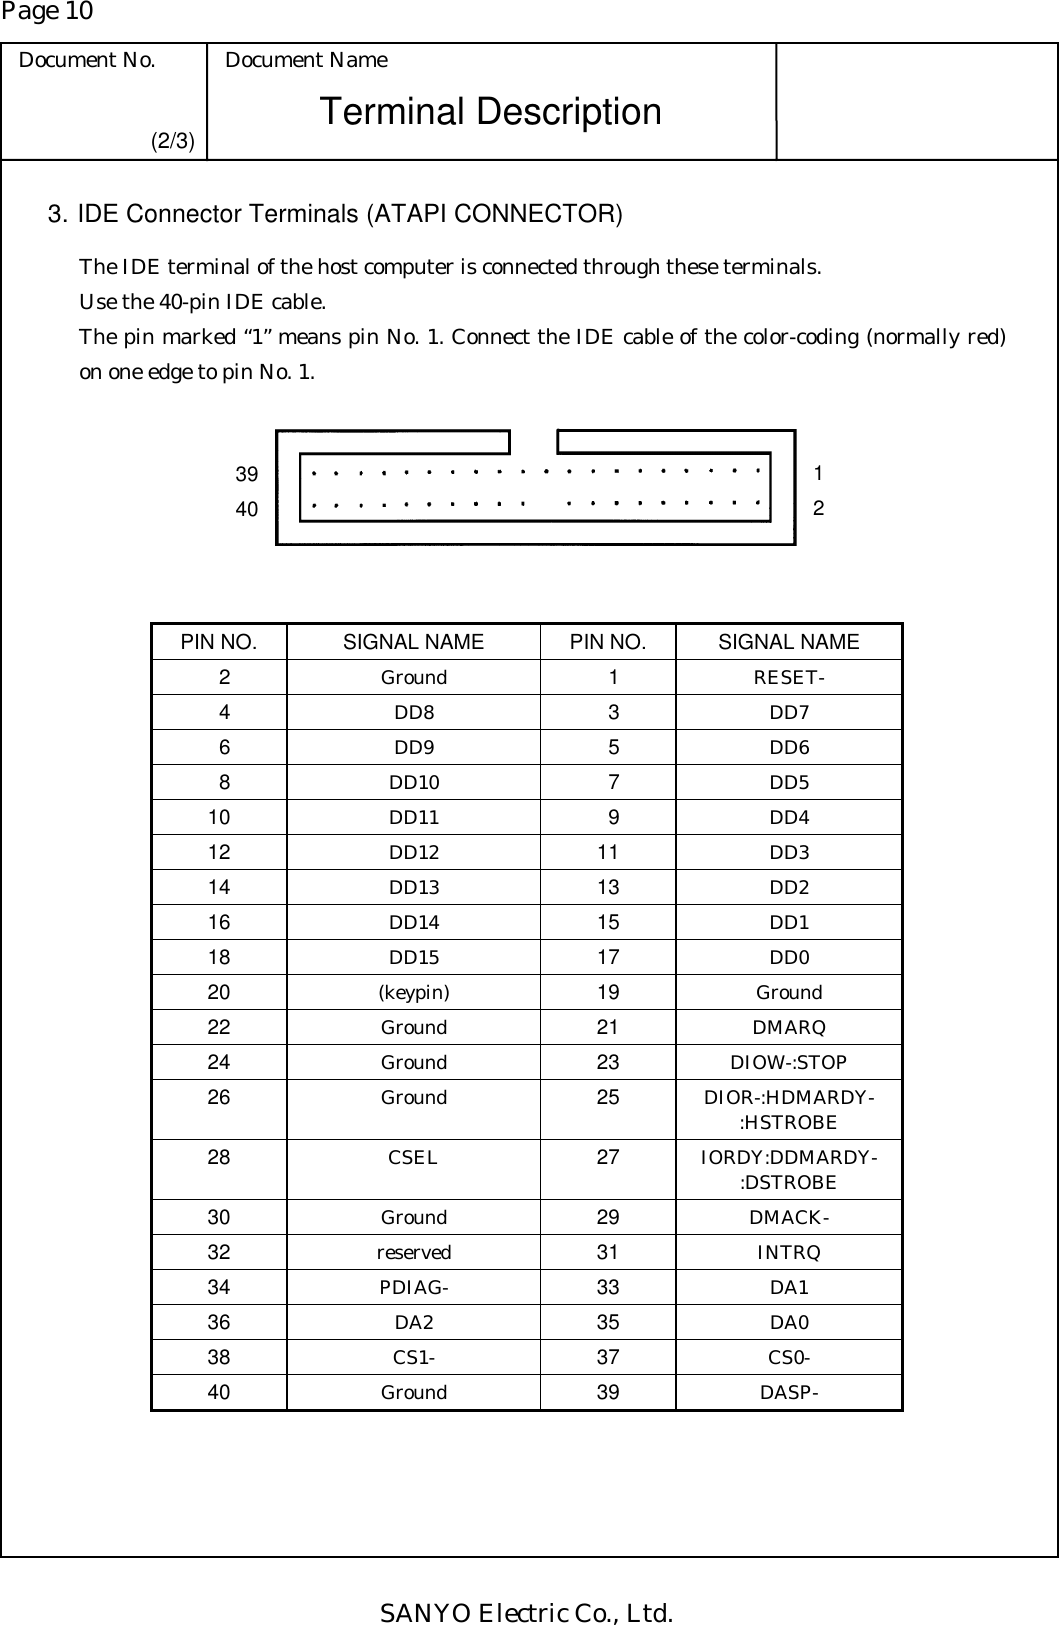 Page 10 Document No.  Document Name SANYO Electric Co., Ltd. Terminal Description (2/3) 3. IDE Connector Terminals (ATAPI CONNECTOR) The IDE terminal of the host computer is connected through these terminals. Use the 40-pin IDE cable. The pin marked “1” means pin No. 1. Connect the IDE cable of the color-coding (normally red) on one edge to pin No. 1.        PIN NO.  SIGNAL NAME  PIN NO.  SIGNAL NAME 2  Ground  1  RESET- 4  DD8  3  DD7 6  DD9  5  DD6 8  DD10  7  DD5 10  DD11  9  DD4 12  DD12  11  DD3 14  DD13  13  DD2 16  DD14  15  DD1 18  DD15  17  DD0 20  (keypin)  19  Ground 22  Ground  21  DMARQ 24  Ground  23  DIOW-:STOP 26  Ground  25  DIOR-:HDMARDY- :HSTROBE 28  CSEL  27  IORDY:DDMARDY- :DSTROBE 30  Ground  29  DMACK- 32  reserved  31  INTRQ 34  PDIAG-  33  DA1 36  DA2  35  DA0 38  CS1-  37  CS0- 40  Ground  39  DASP- 39401 2 